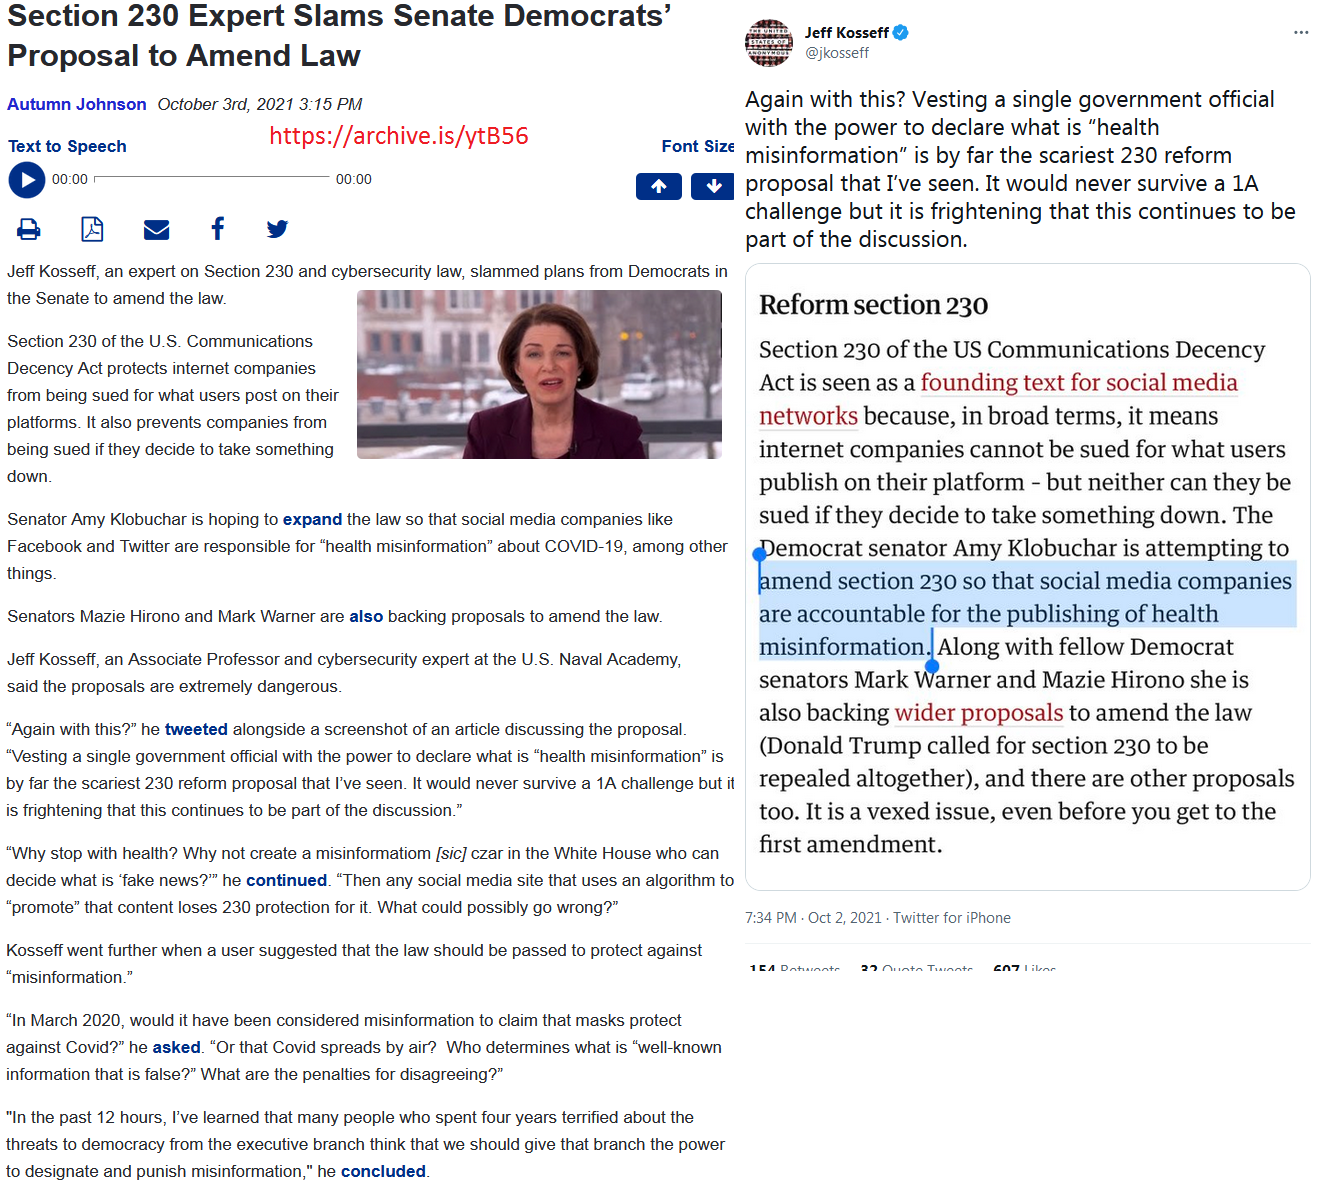 10_3_2021 Democrats plan to amend Section 230 law.png